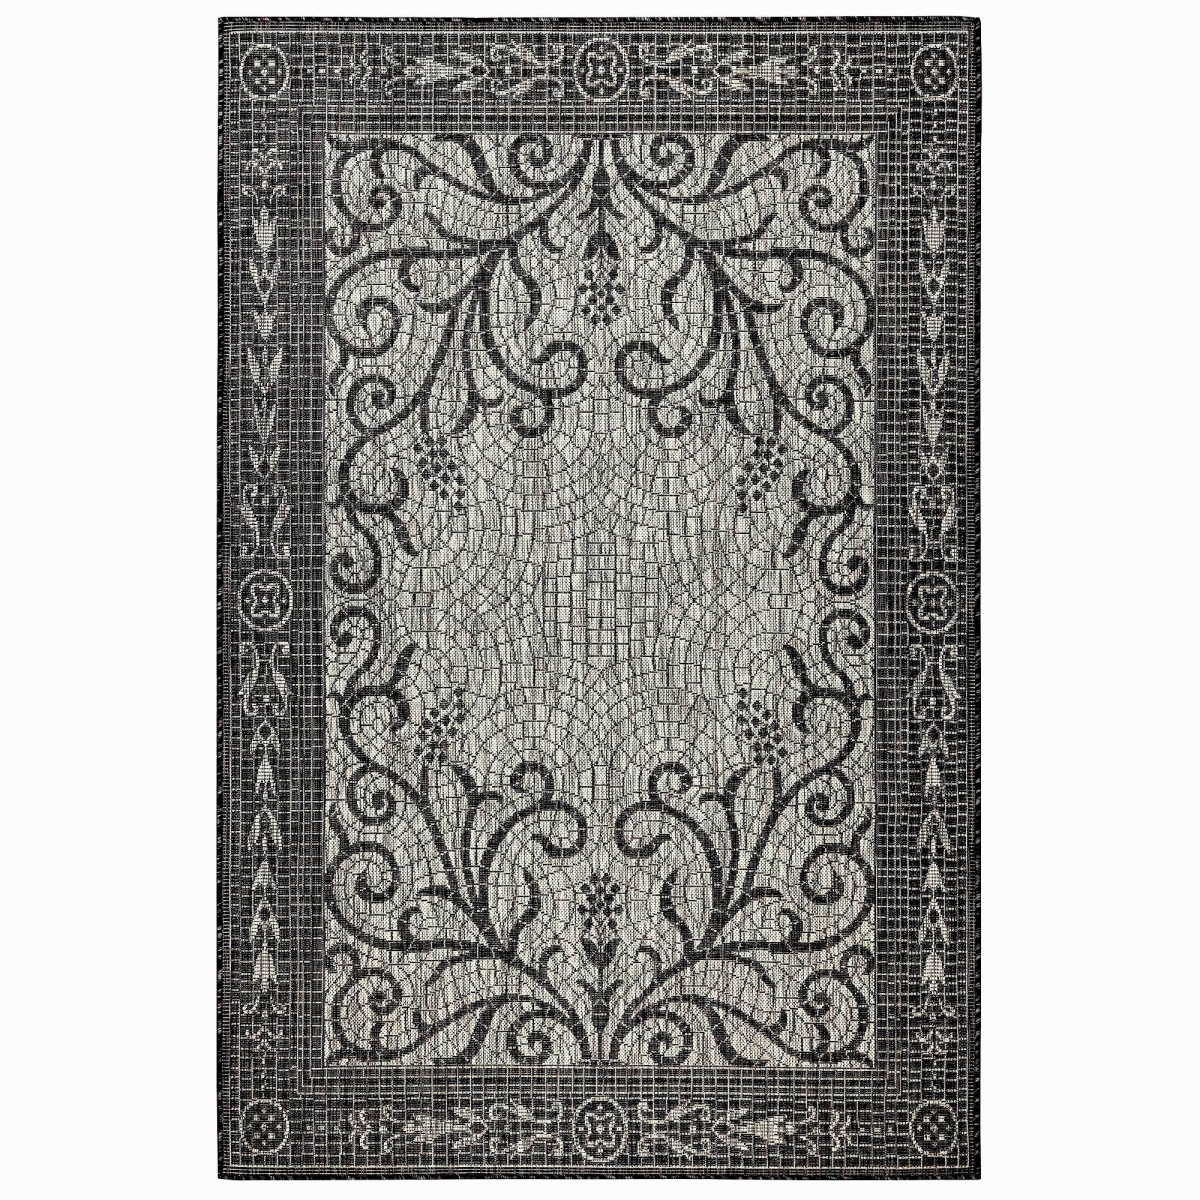 Trans-ocean Imports Cre45842948 39 In. X 59 In. Liora Manne Carmel Mosaic Indoor & Outdoor Wilton Woven Rectangle Rug - Black